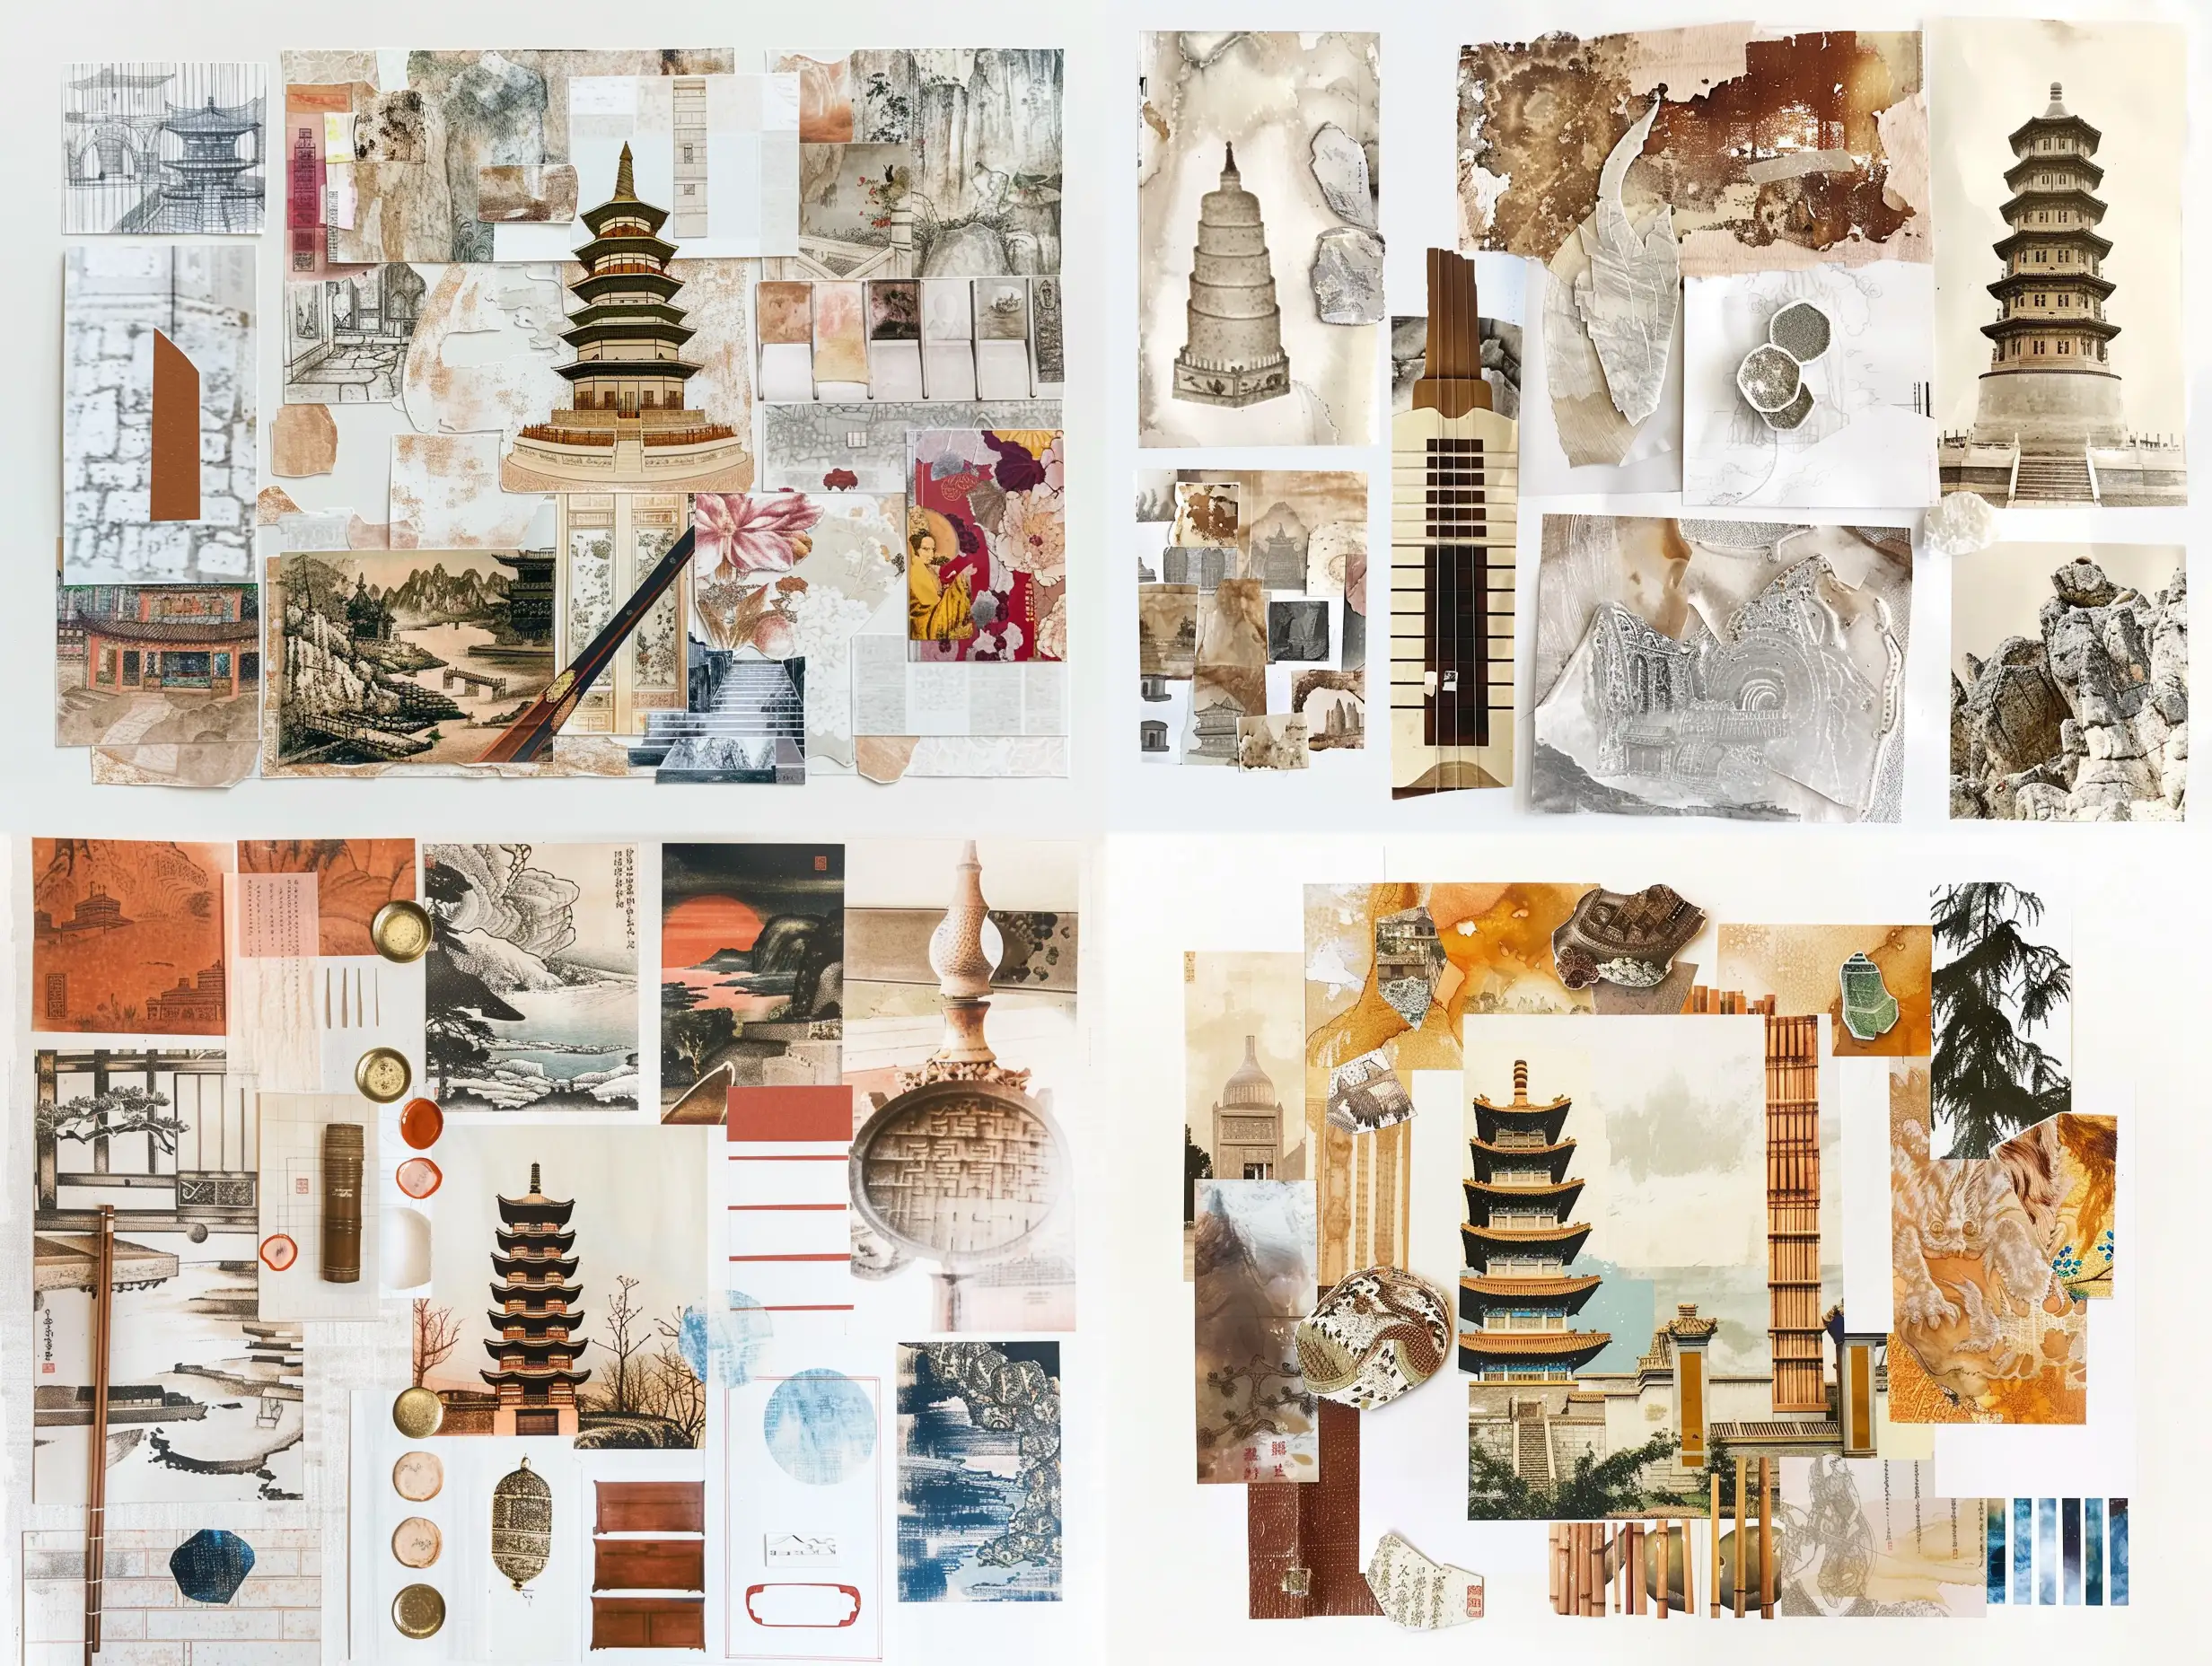 Tang-Dynasty-Pipa-Collage-Art-Giant-Wild-Goose-Pagoda-Inspiration